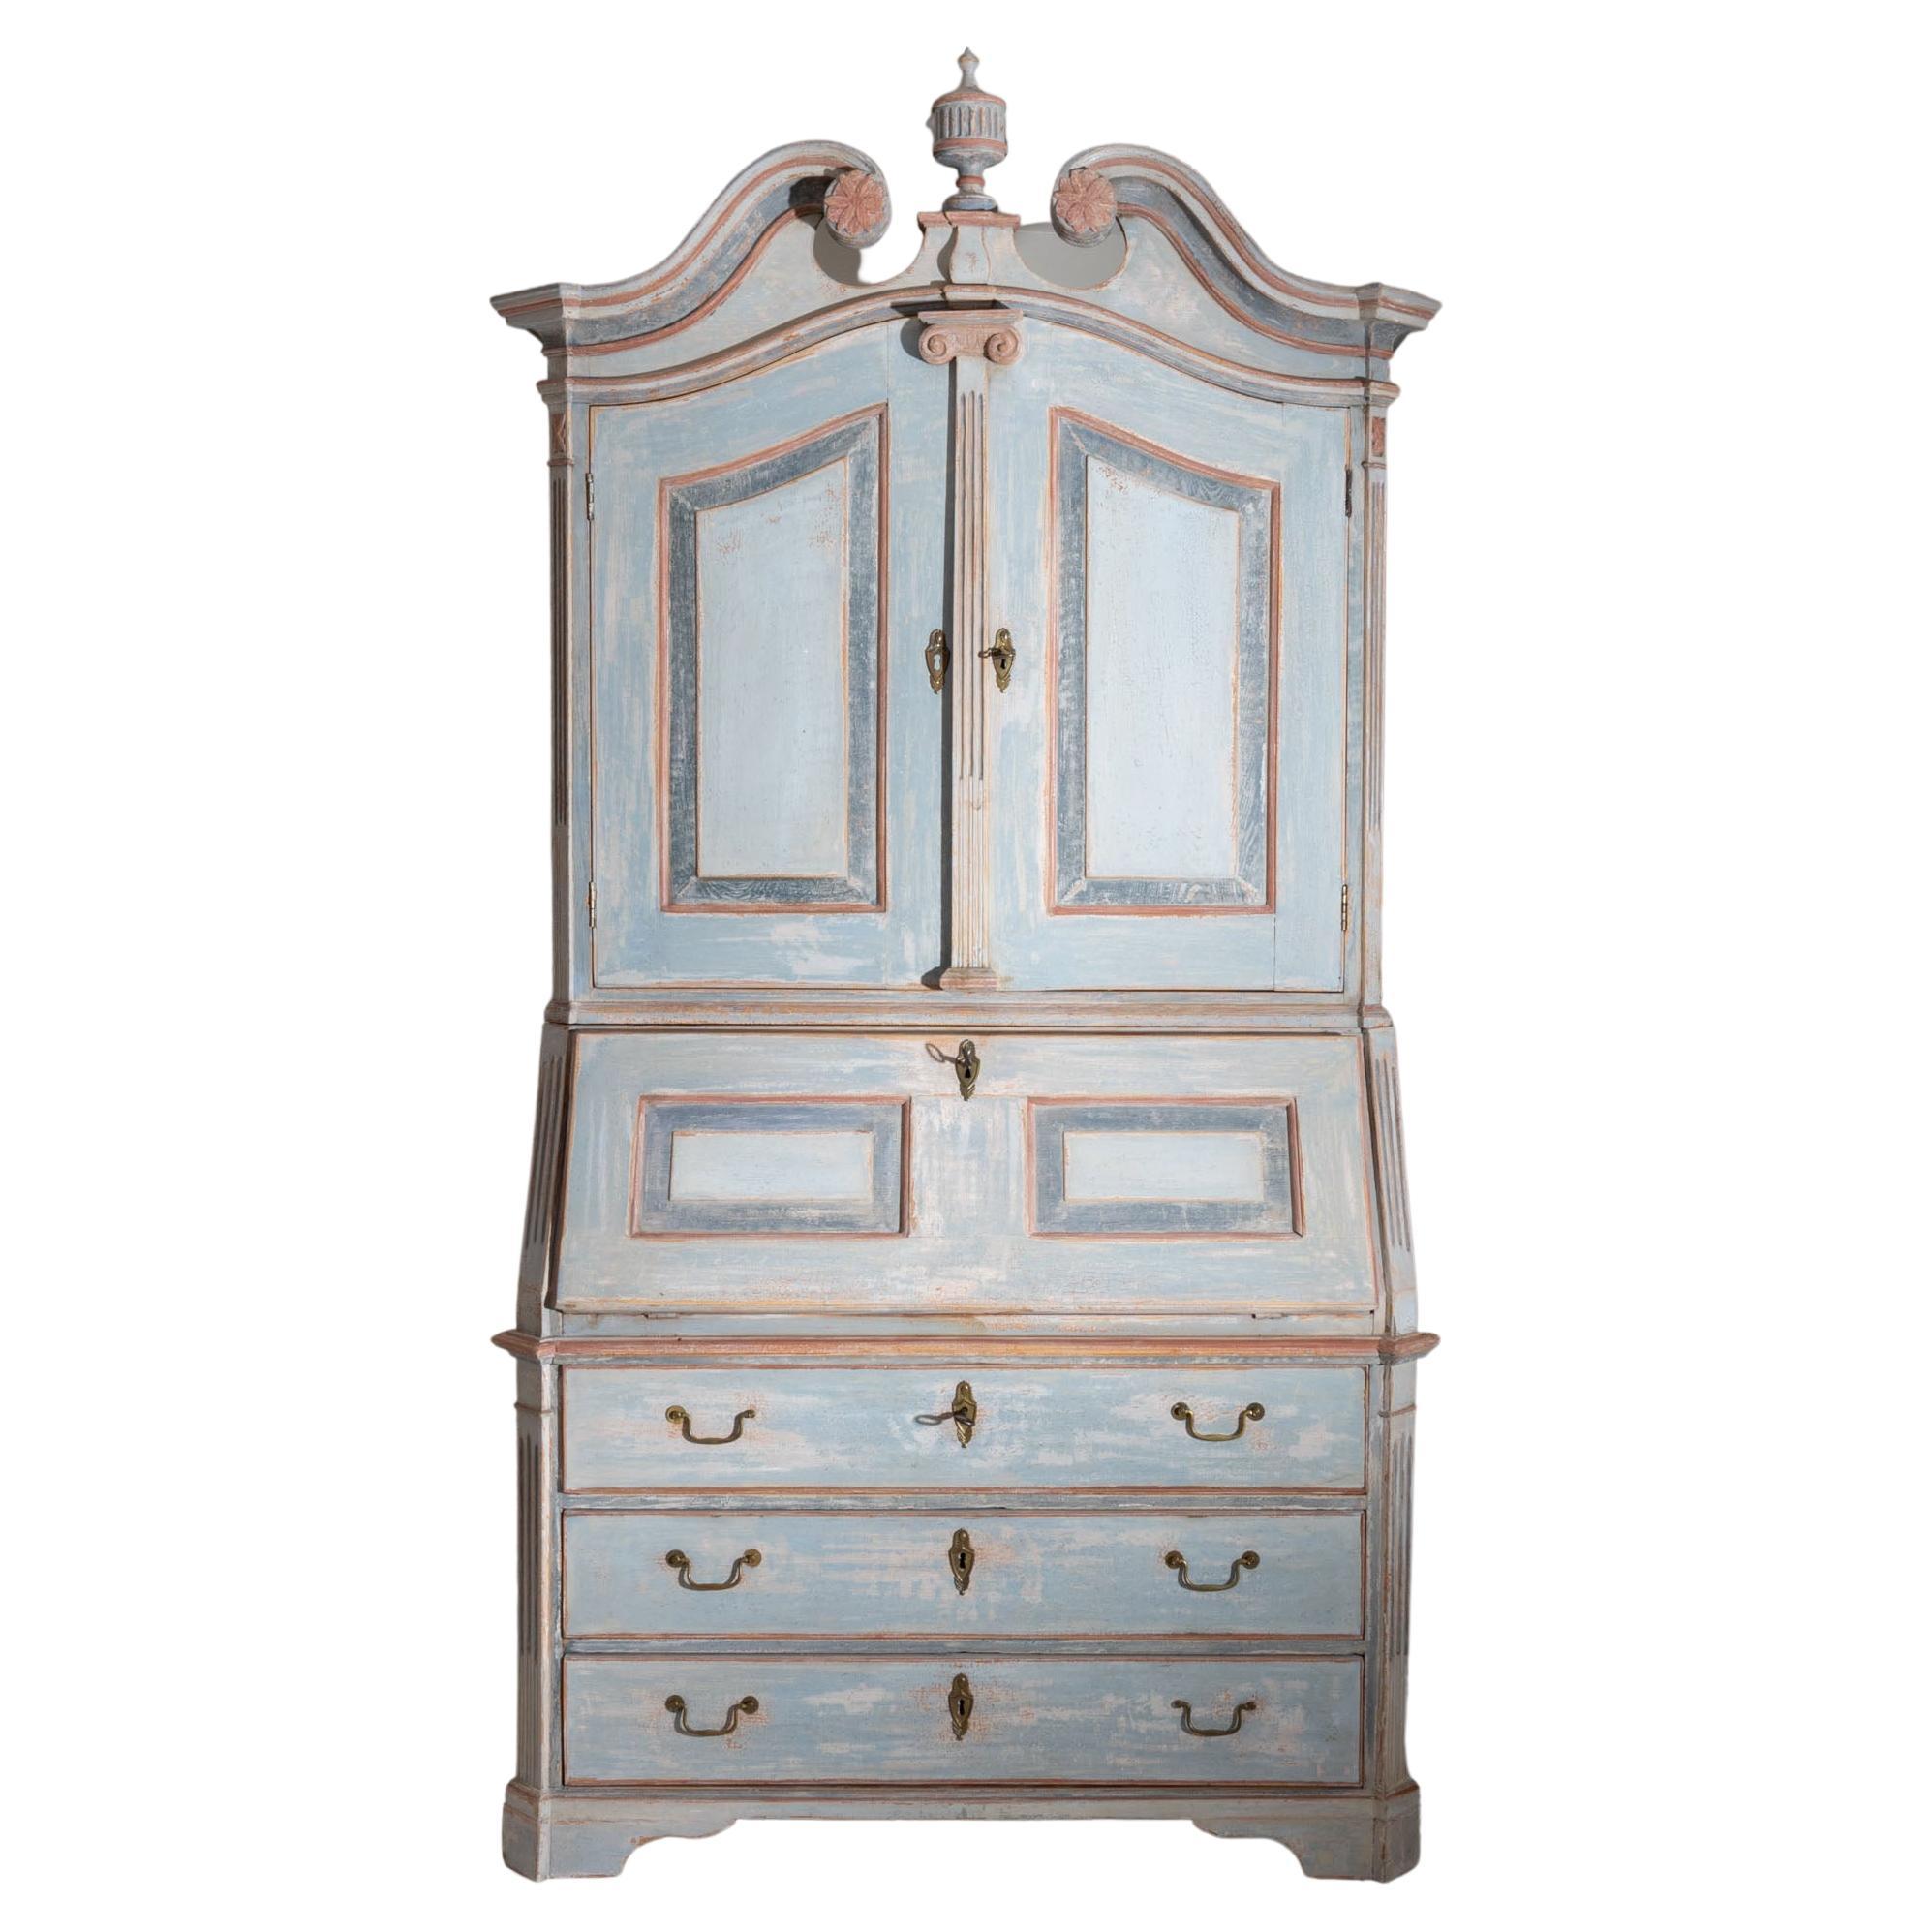 Softwood Hand Painted Gustavian-Style Secretaire in Blue and Red, 18th Century